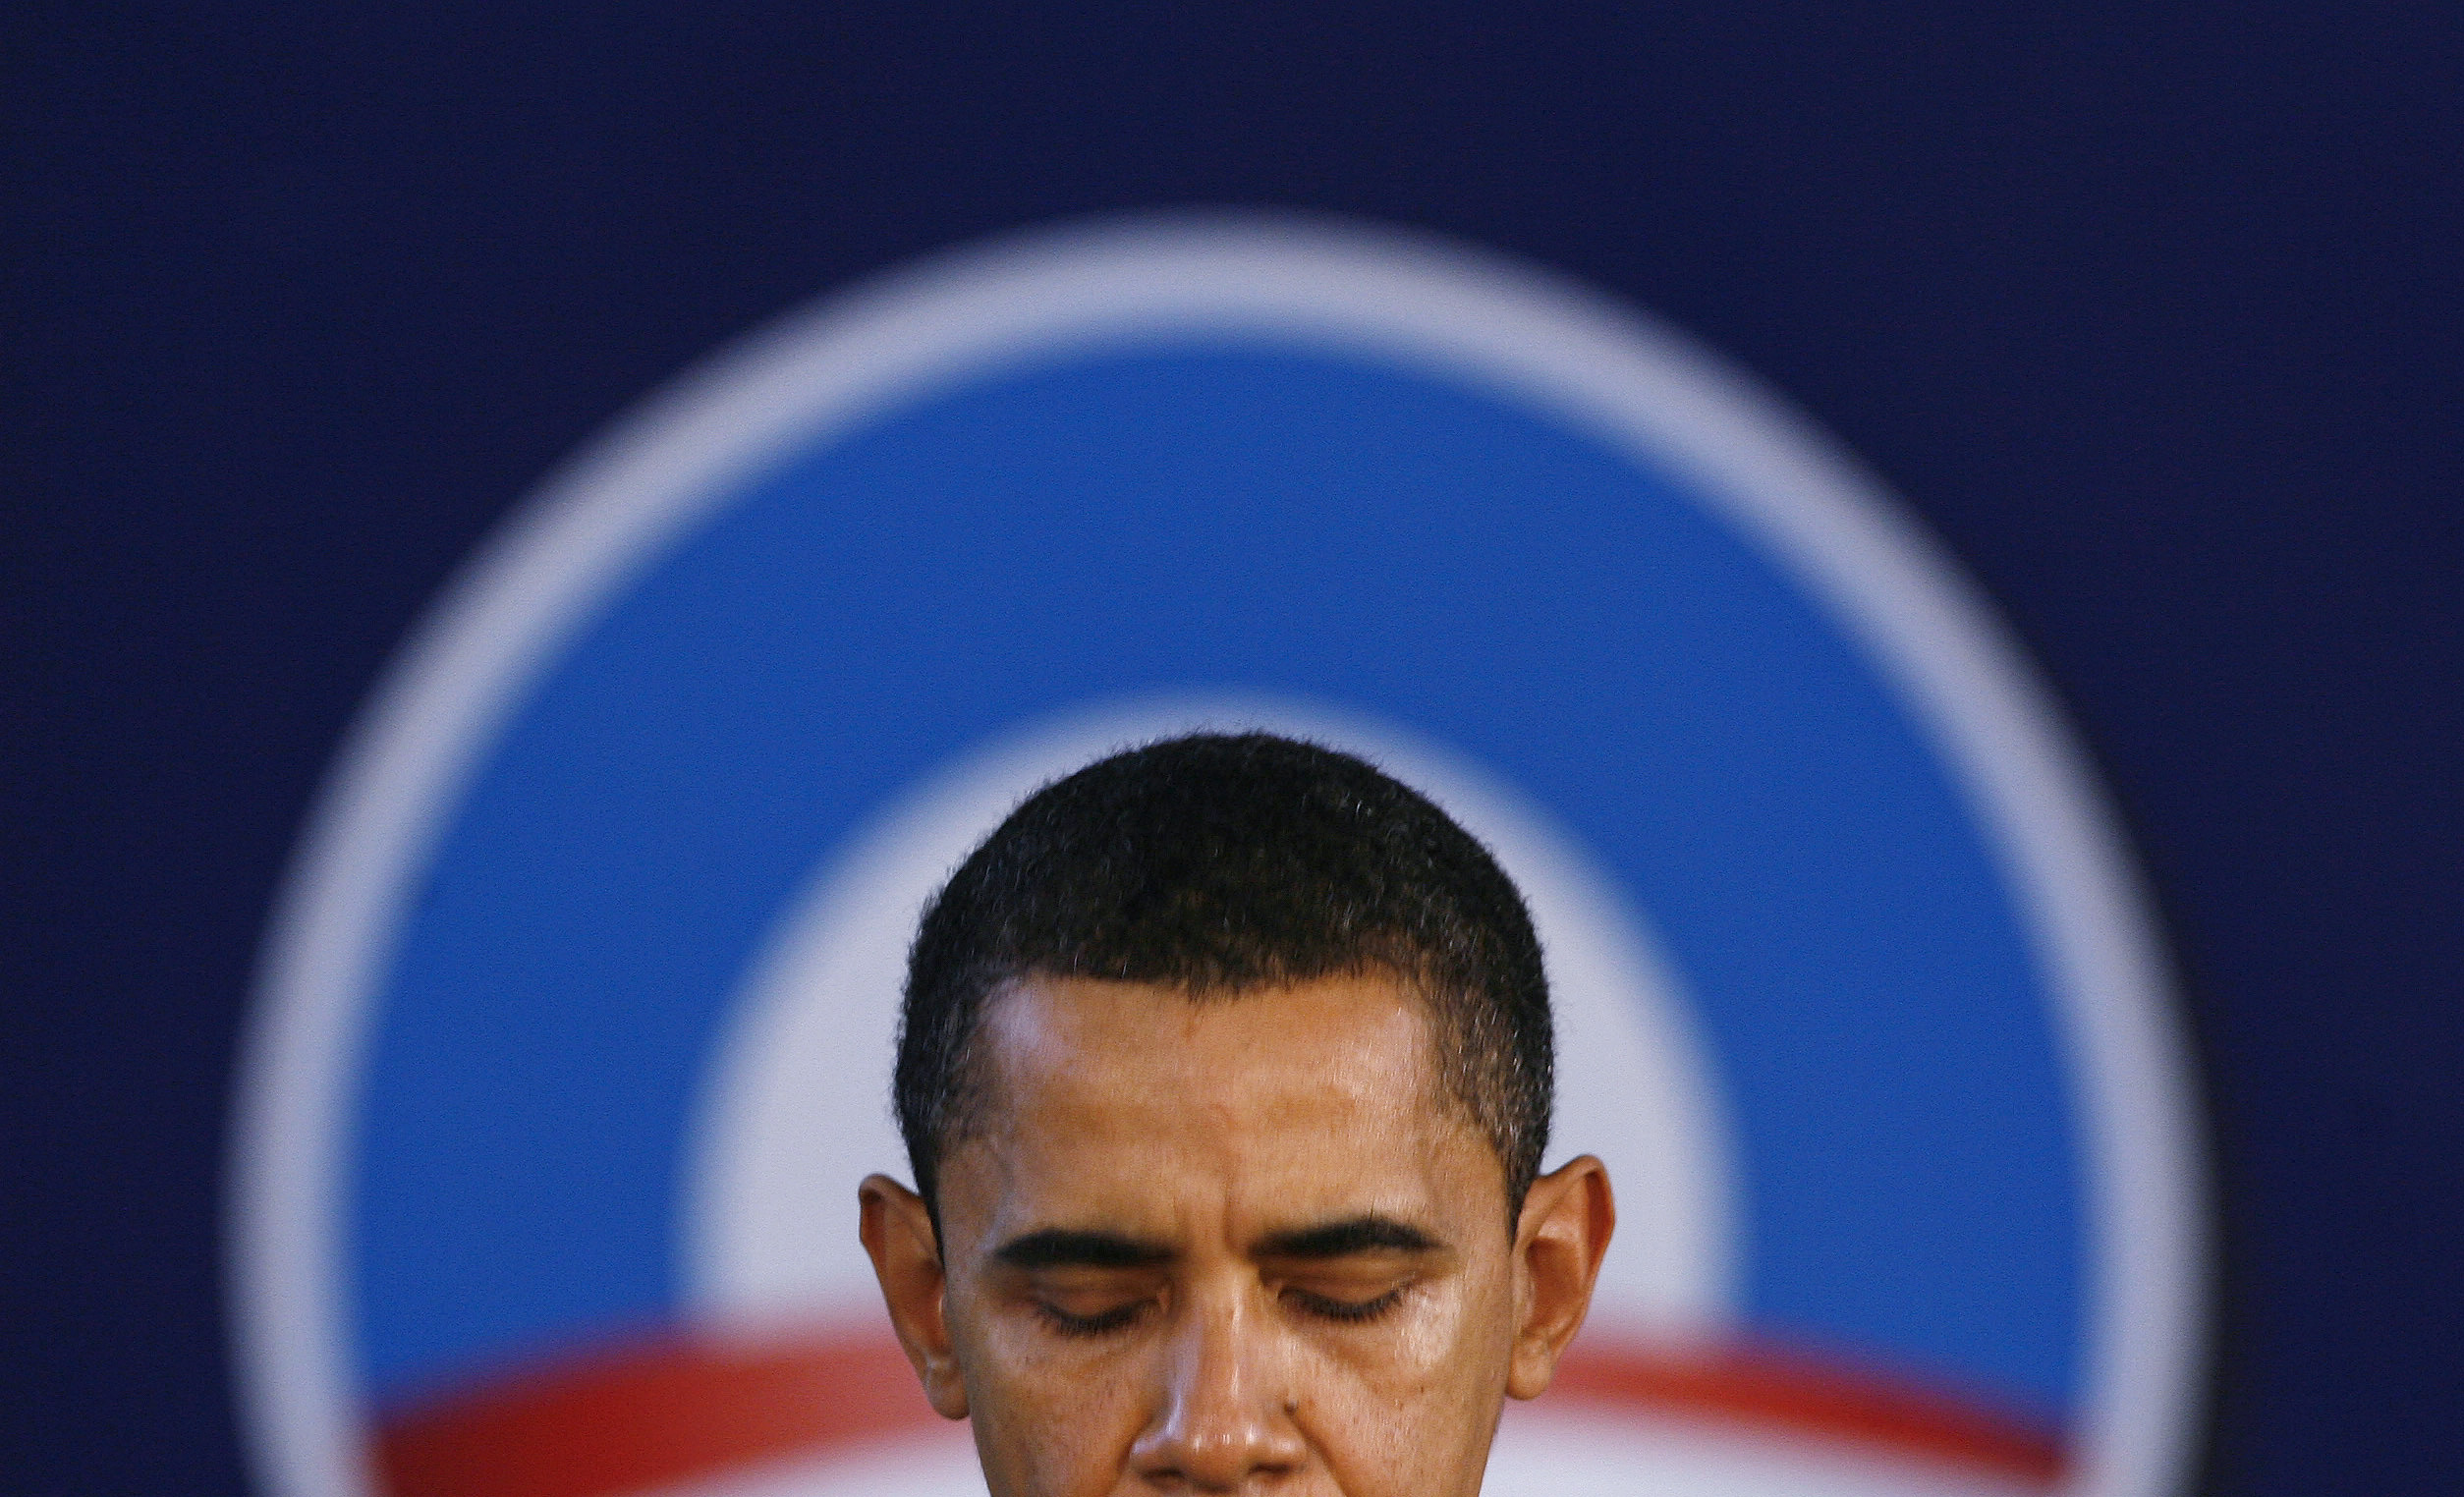 Democratic presidential candidate U.S. Senator Barack Obama listens to questions during a campaign stop at Central Elementary School in Nevada